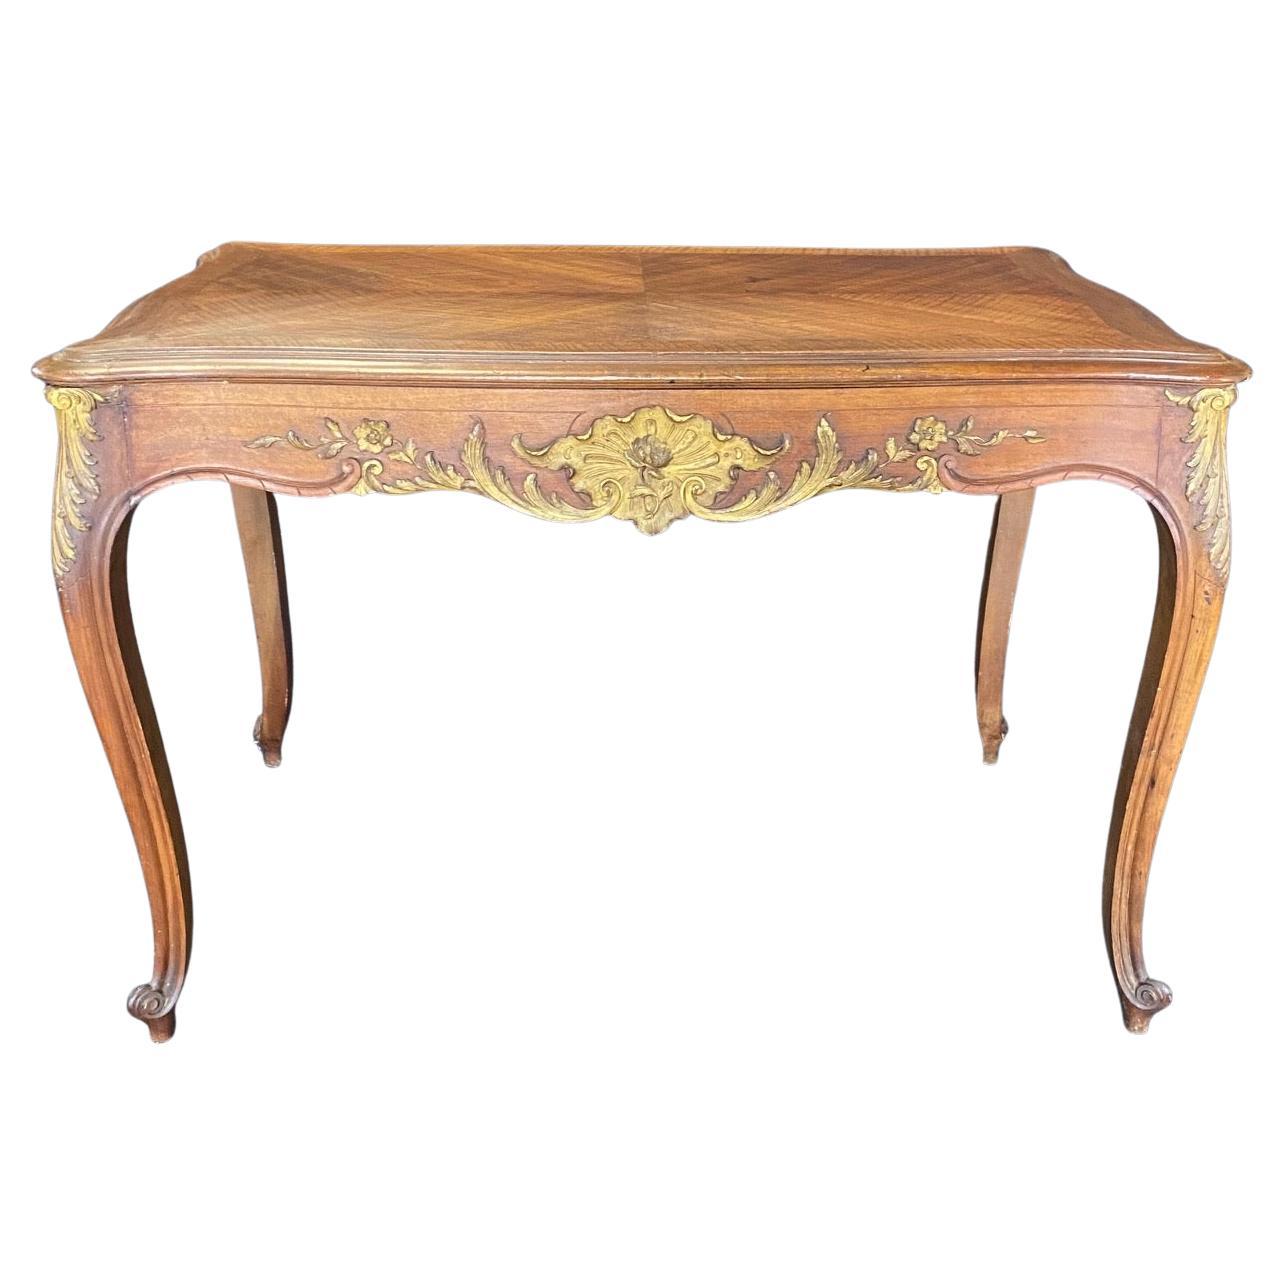  Gorgeous French Louis XV Carved Walnut Side Table or Desk with Gold Gilt For Sale